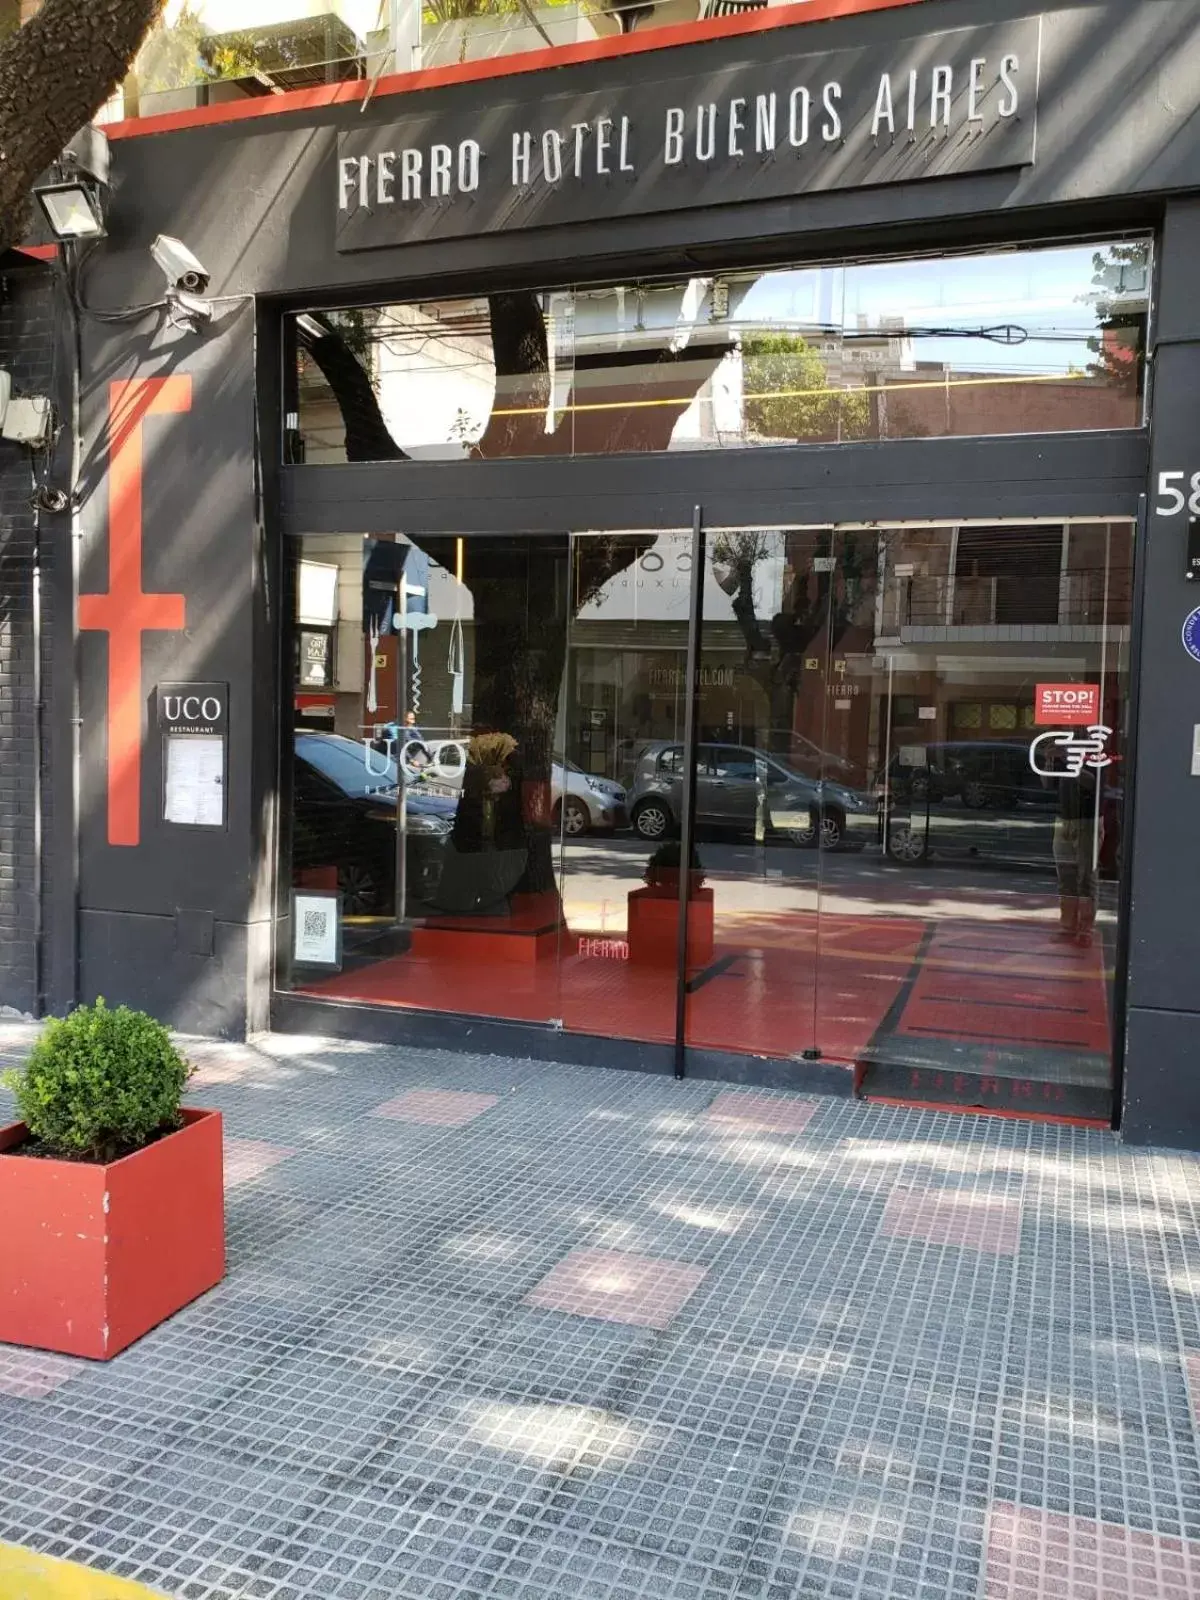 Property building in Fierro Hotel Buenos Aires